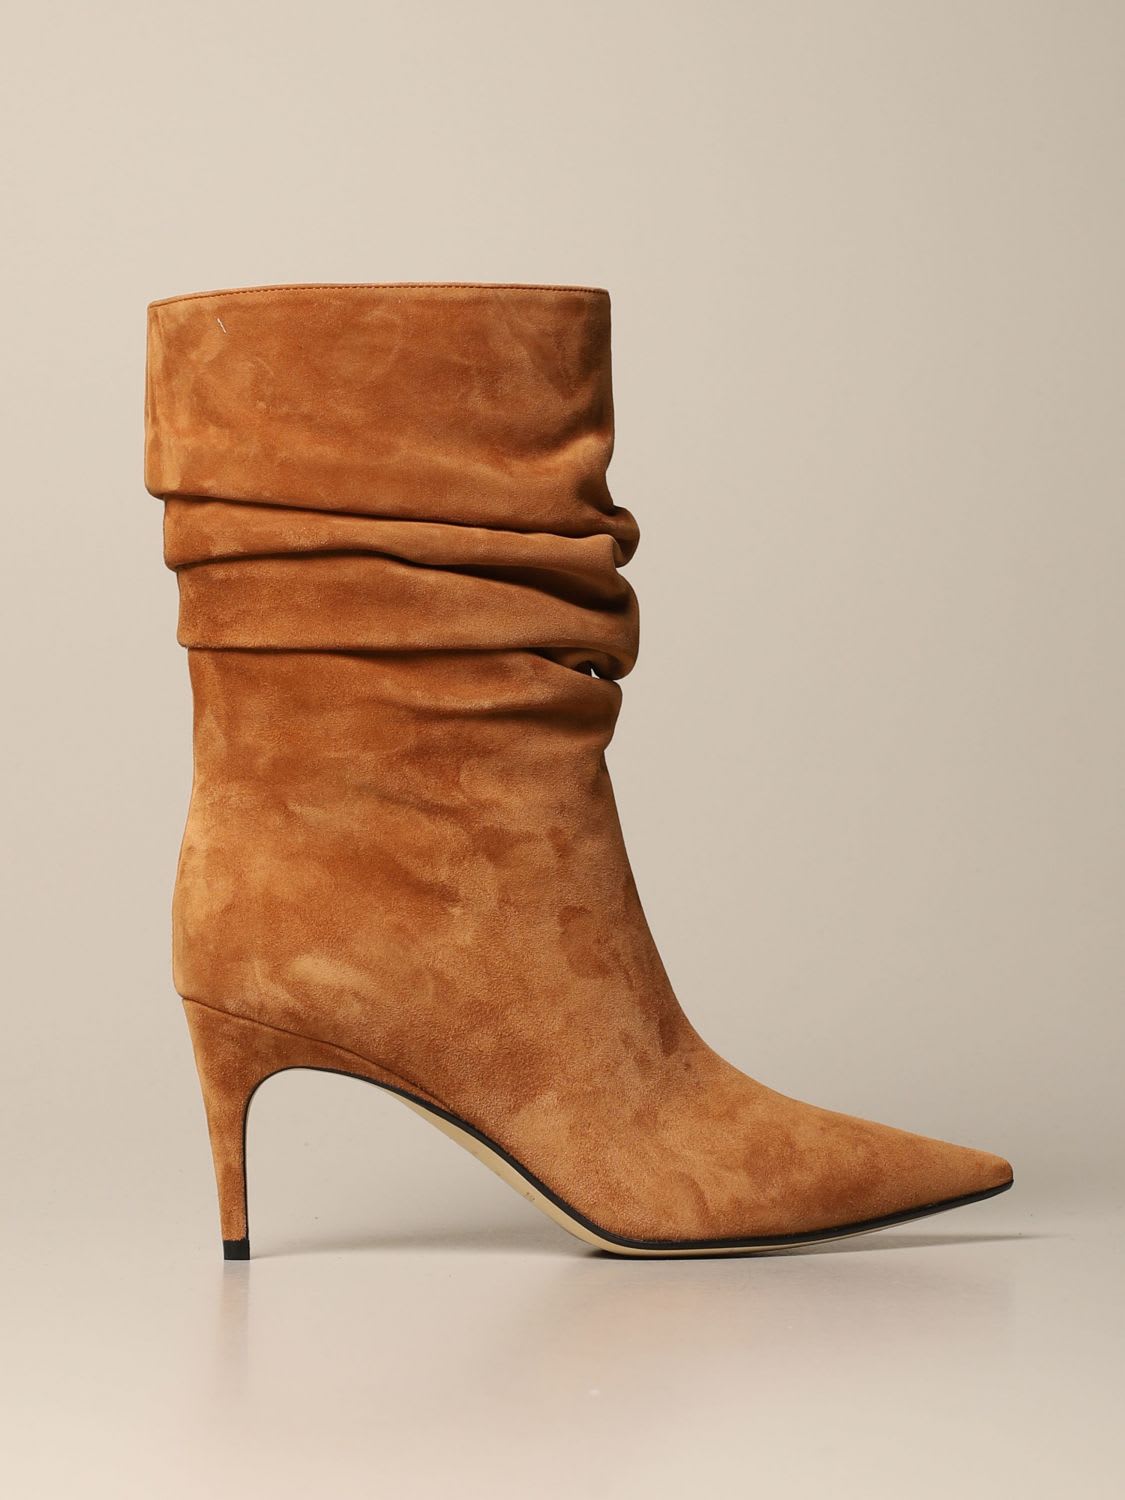 Buy Sergio Rossi Boots Sergio Rossi Suede Boot online, shop Sergio Rossi shoes with free shipping